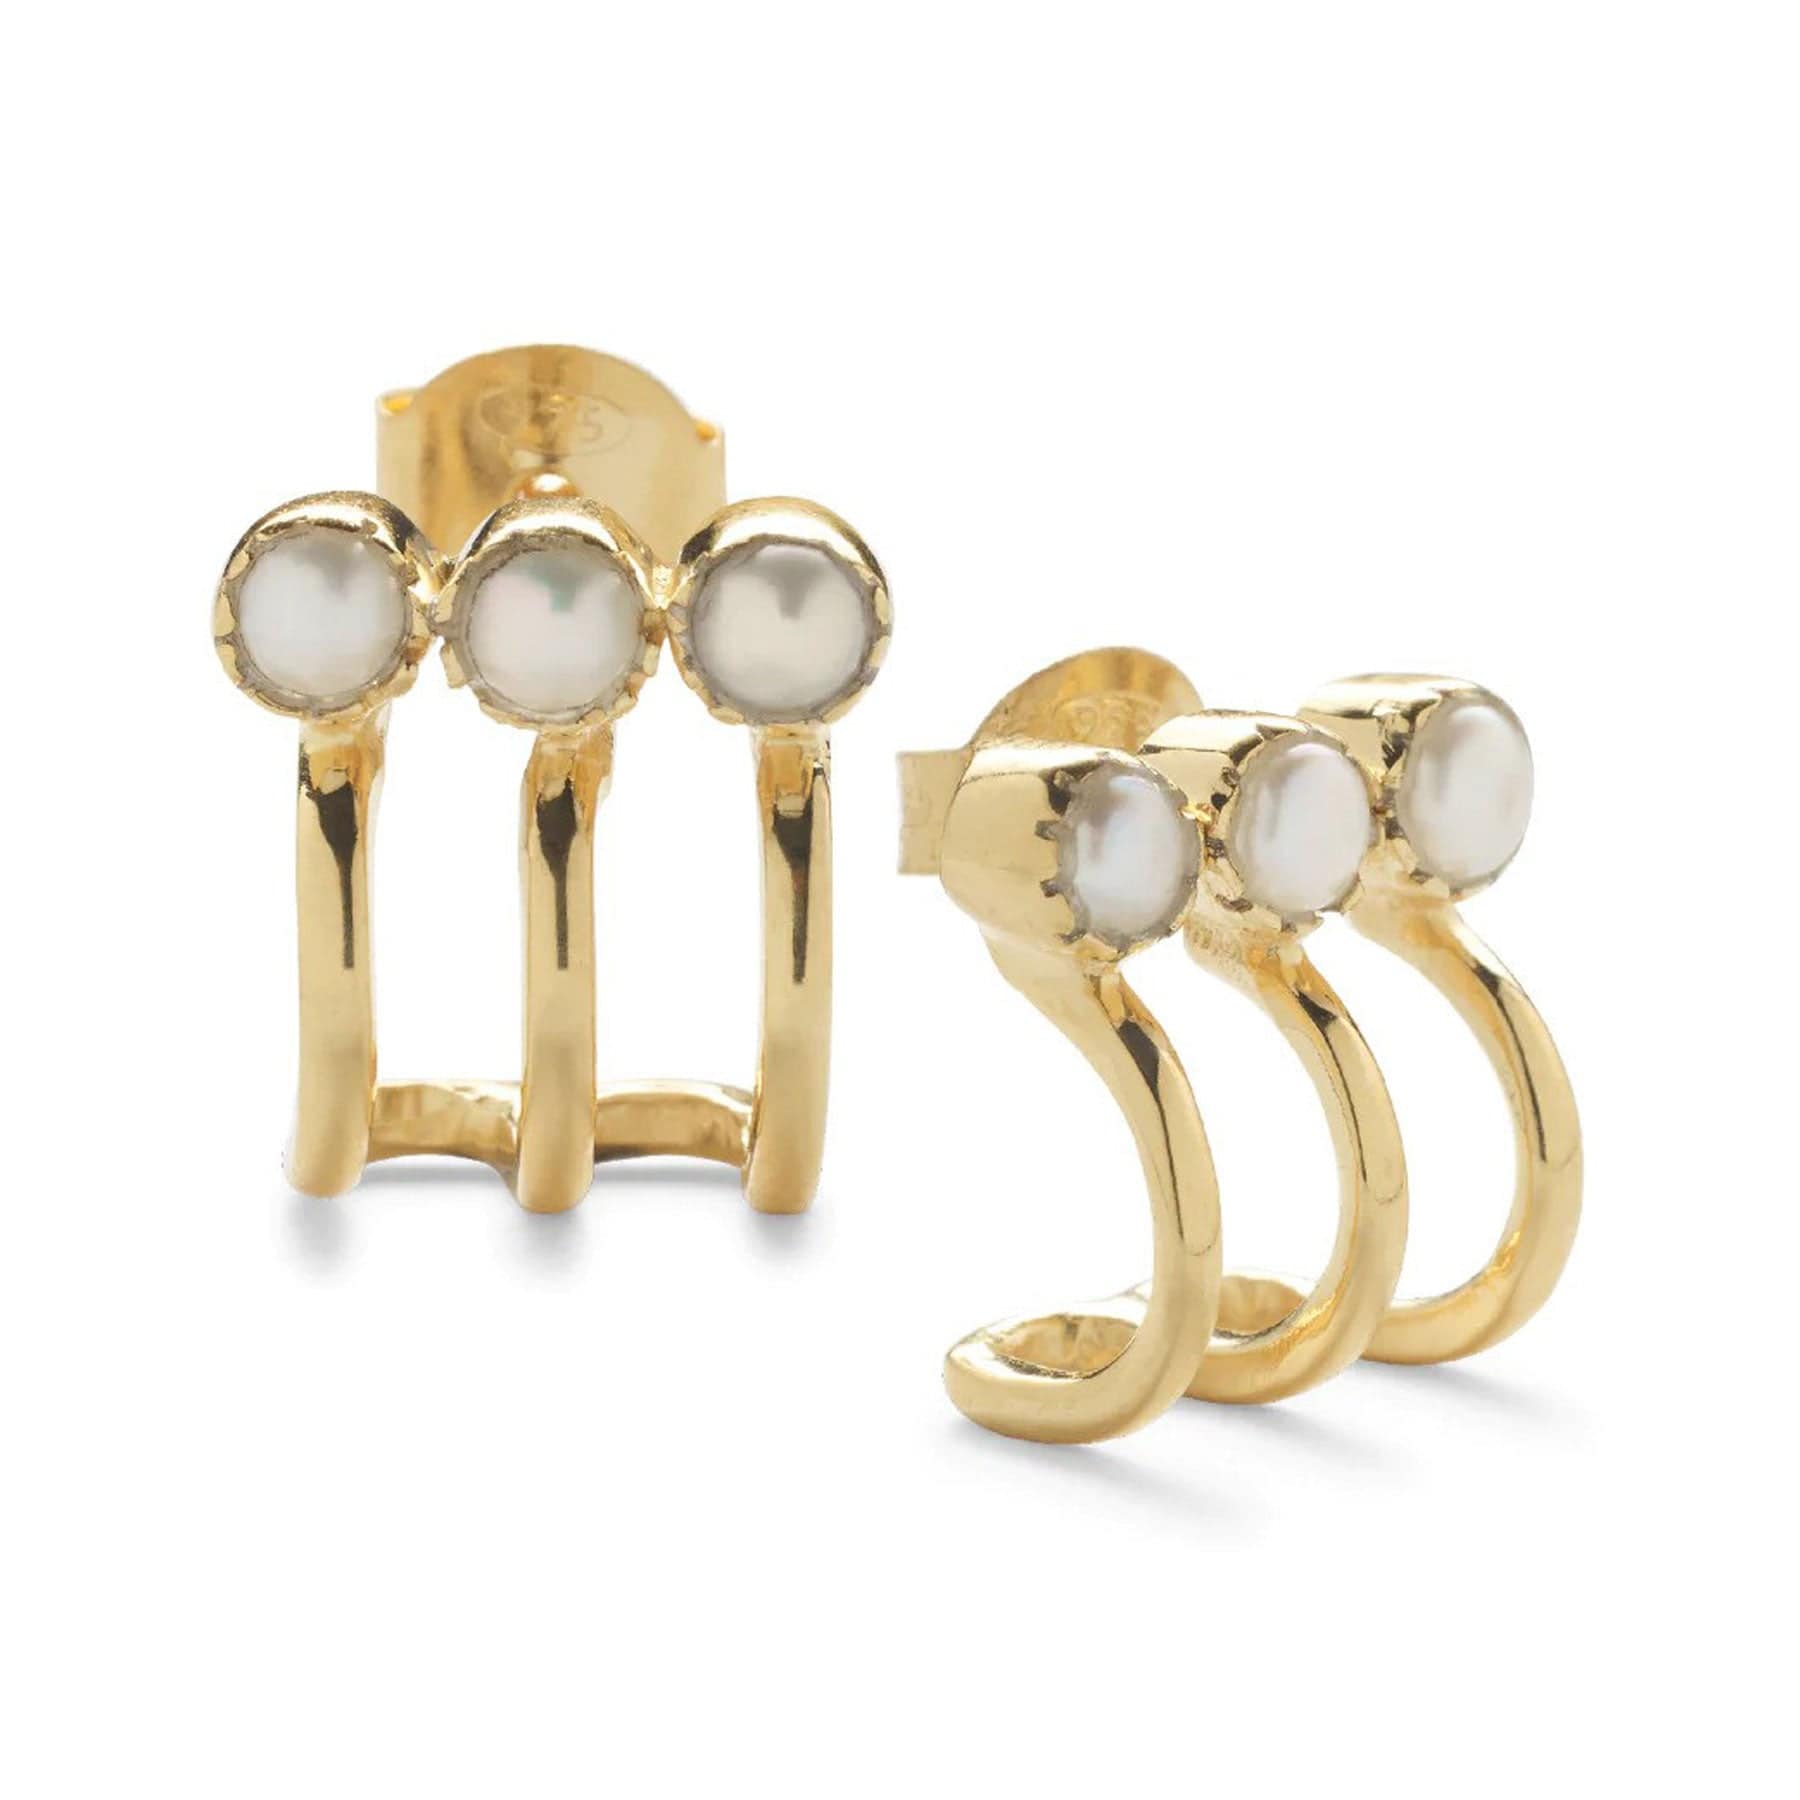 Vimla earring with pearl gold